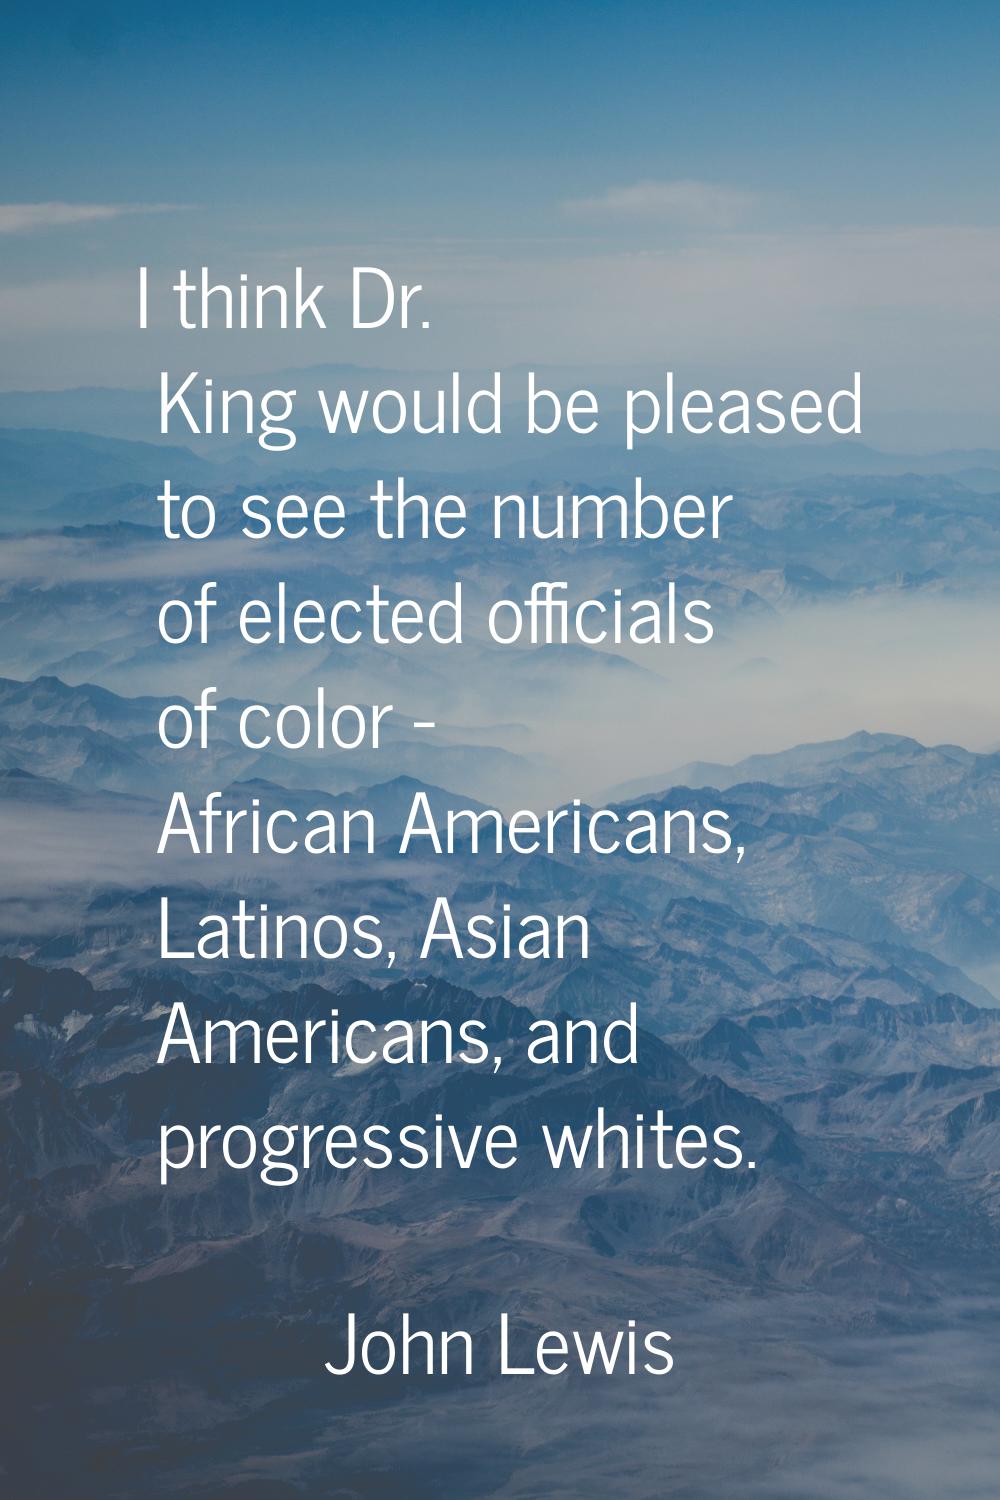 I think Dr. King would be pleased to see the number of elected officials of color - African America